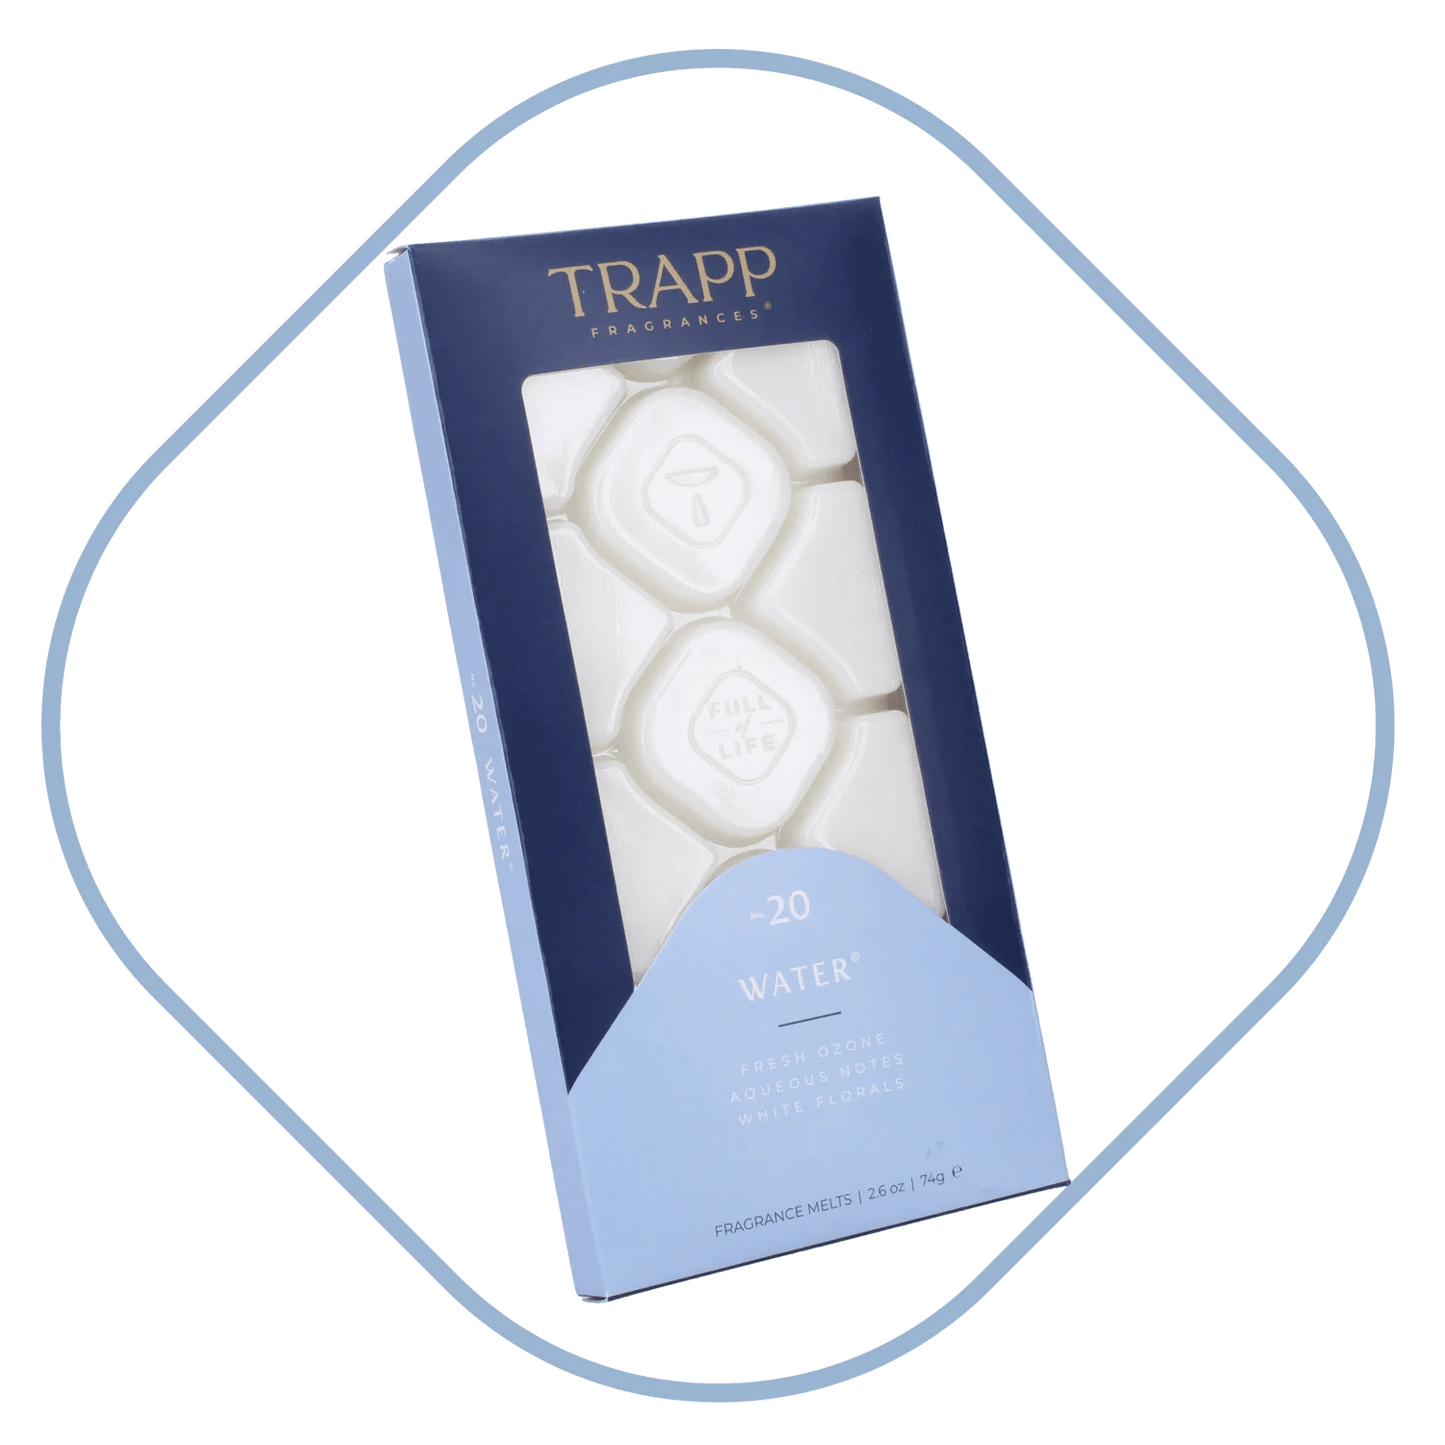 Trapp No.20 Water Fragrance Melts